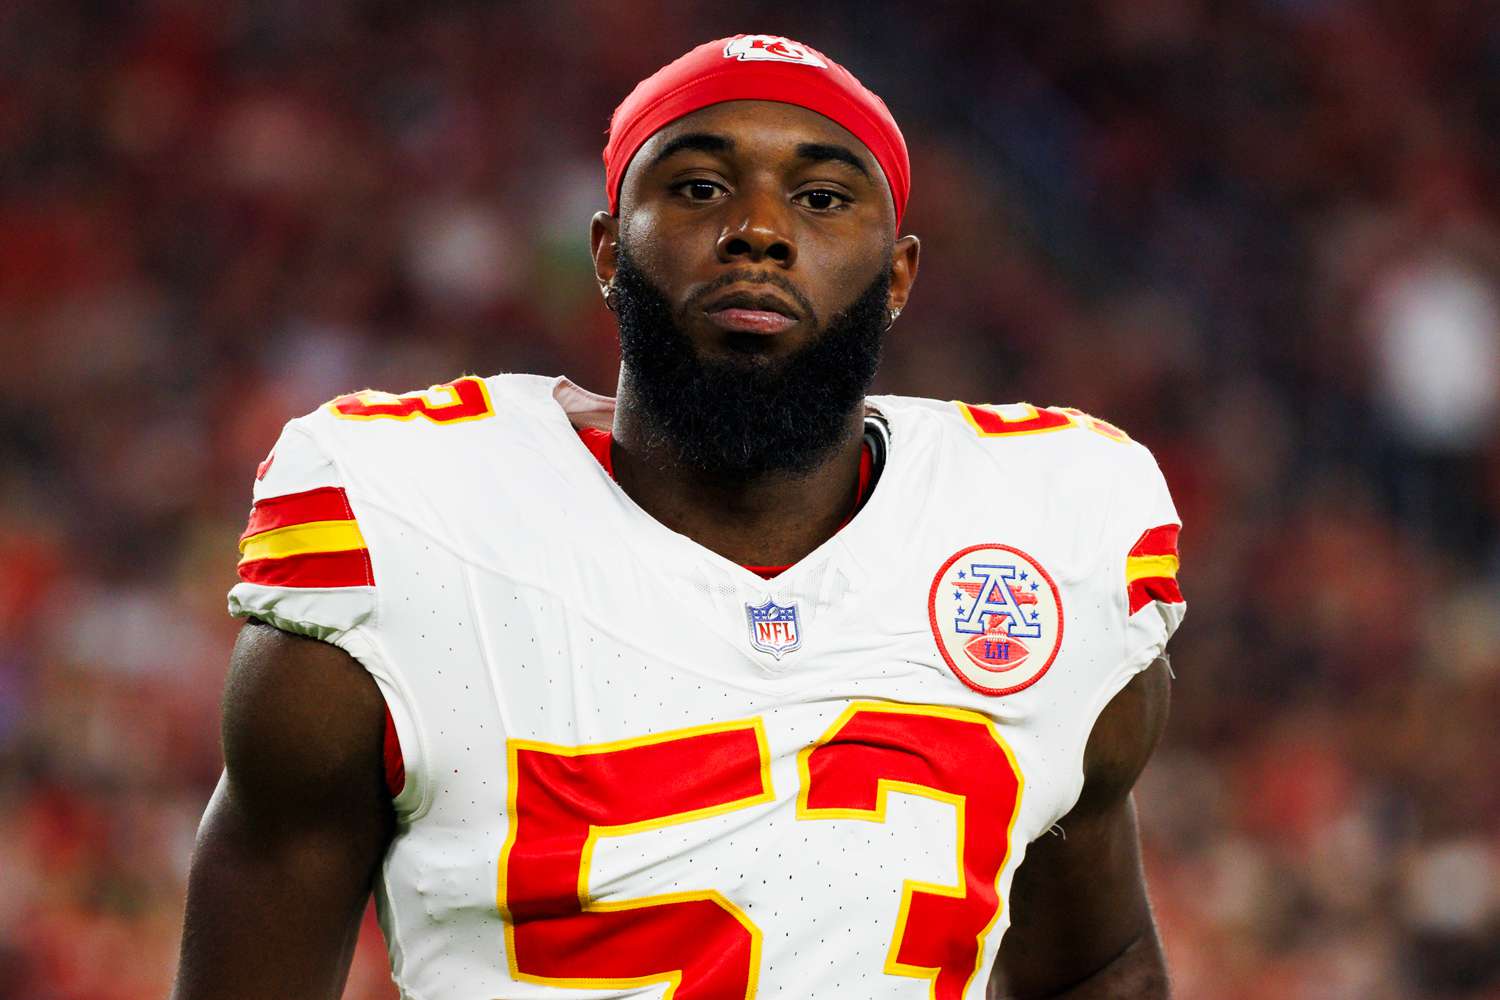 Chiefs’ BJ Thompson Released from Hospital After Seizure and Cardiac Arrest [Video]